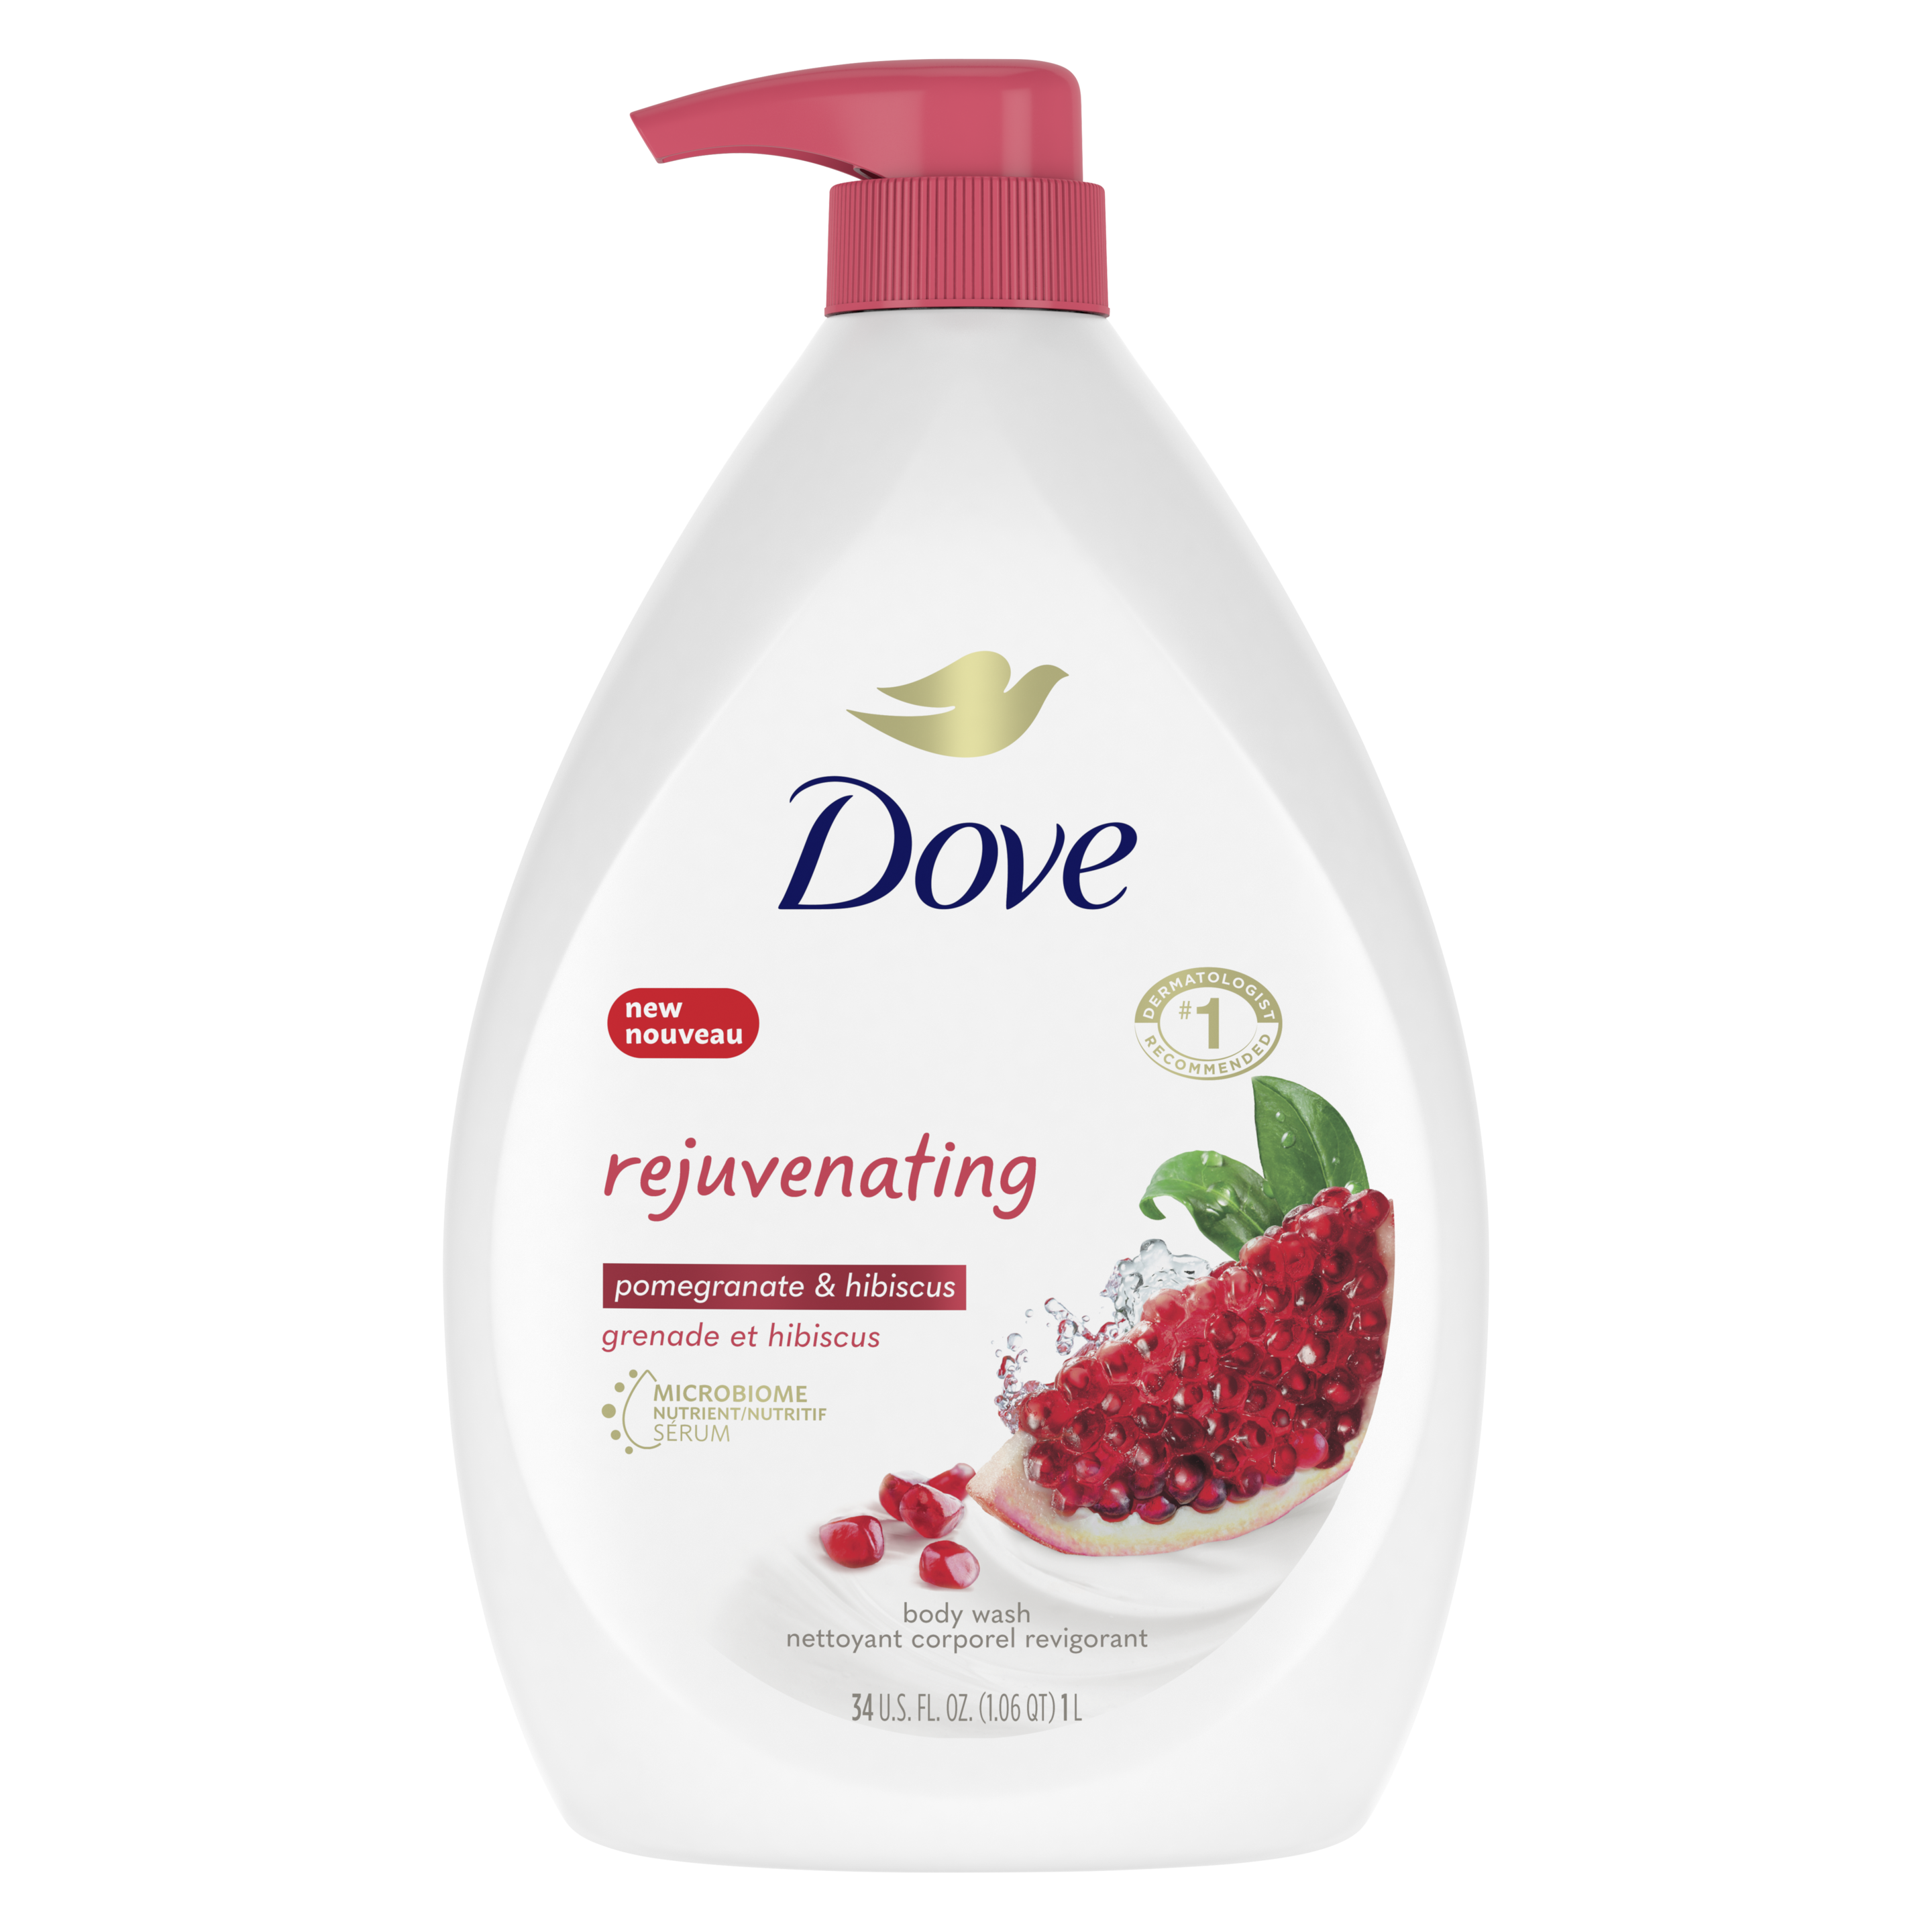 Rejuvenating Body Wash with Pomegranate and Hibiscus Tea 34 oz